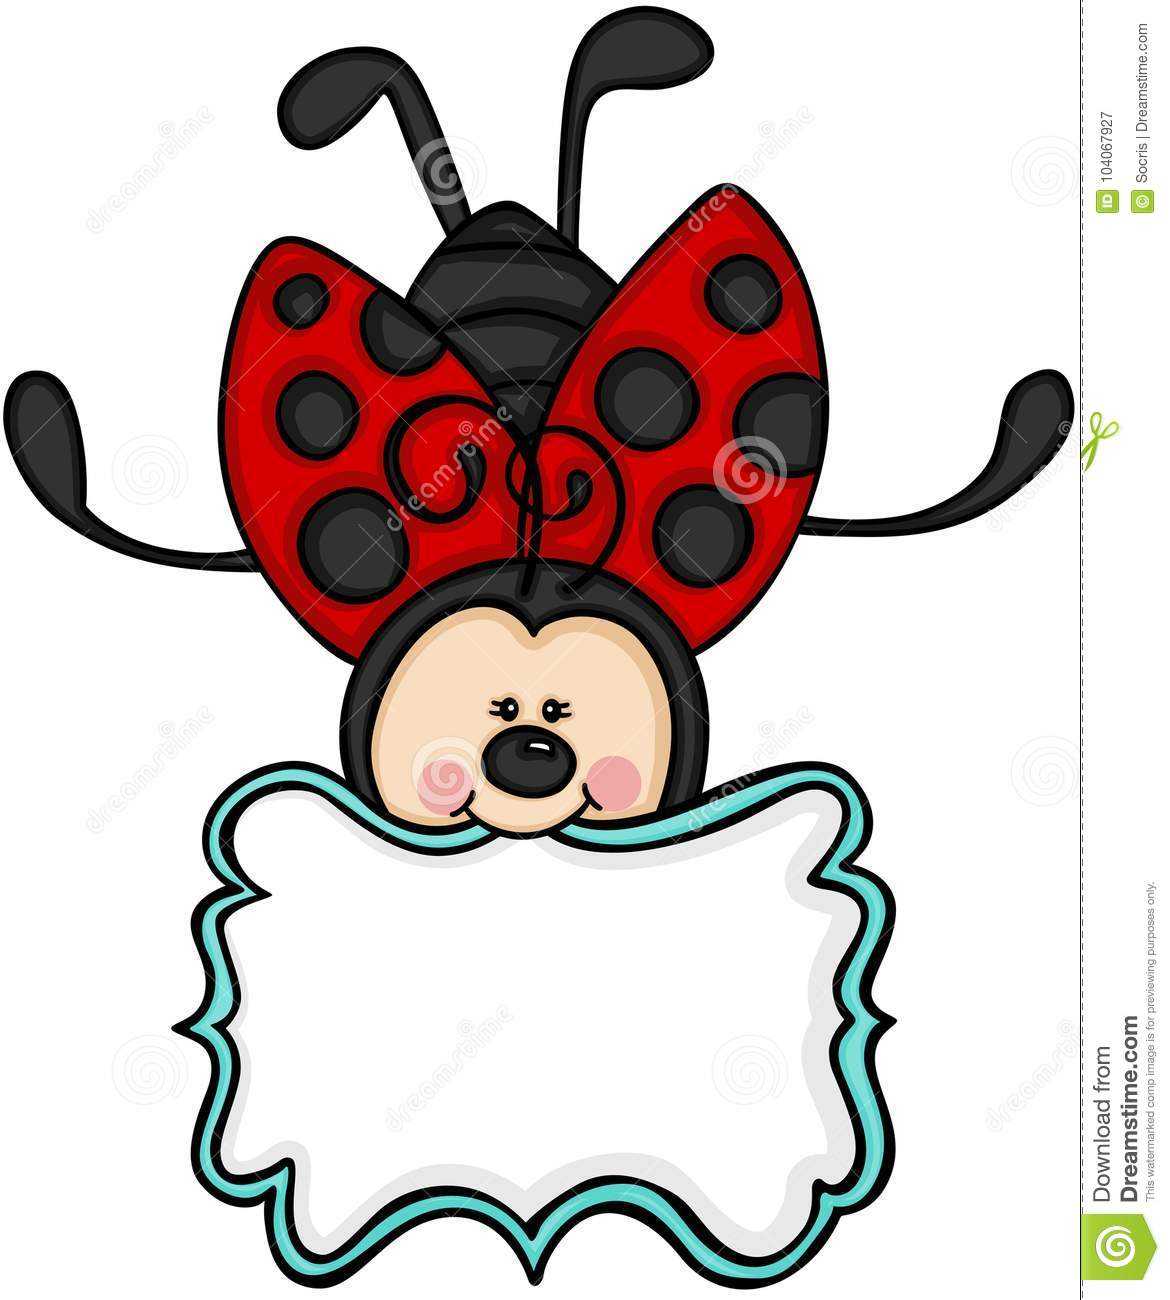 Cute Ladybug With Blank Label Sticker Stock Vector With Blank Ladybug Template